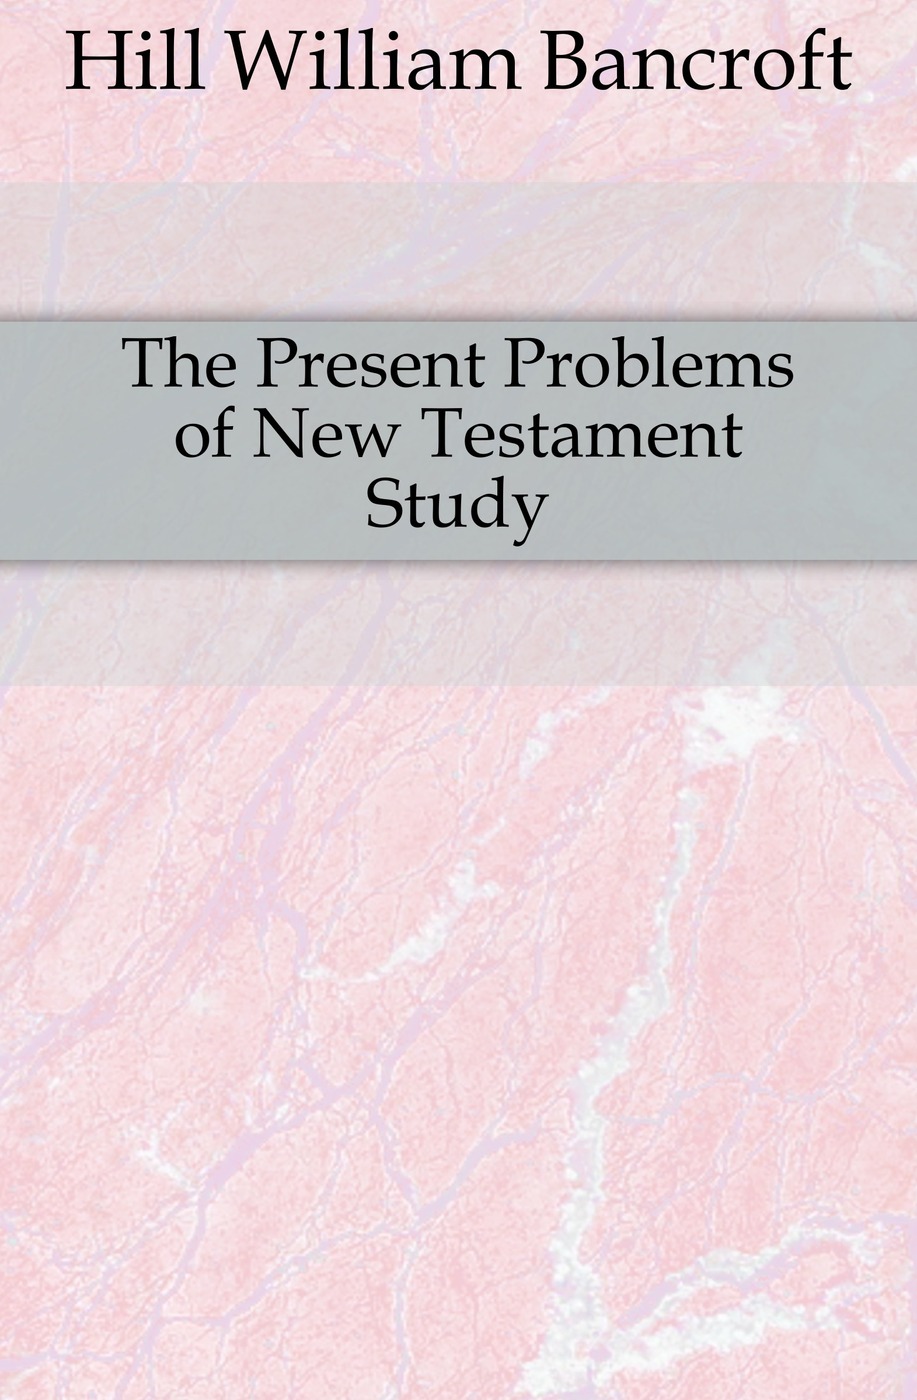 The Present Problems of New Testament Study